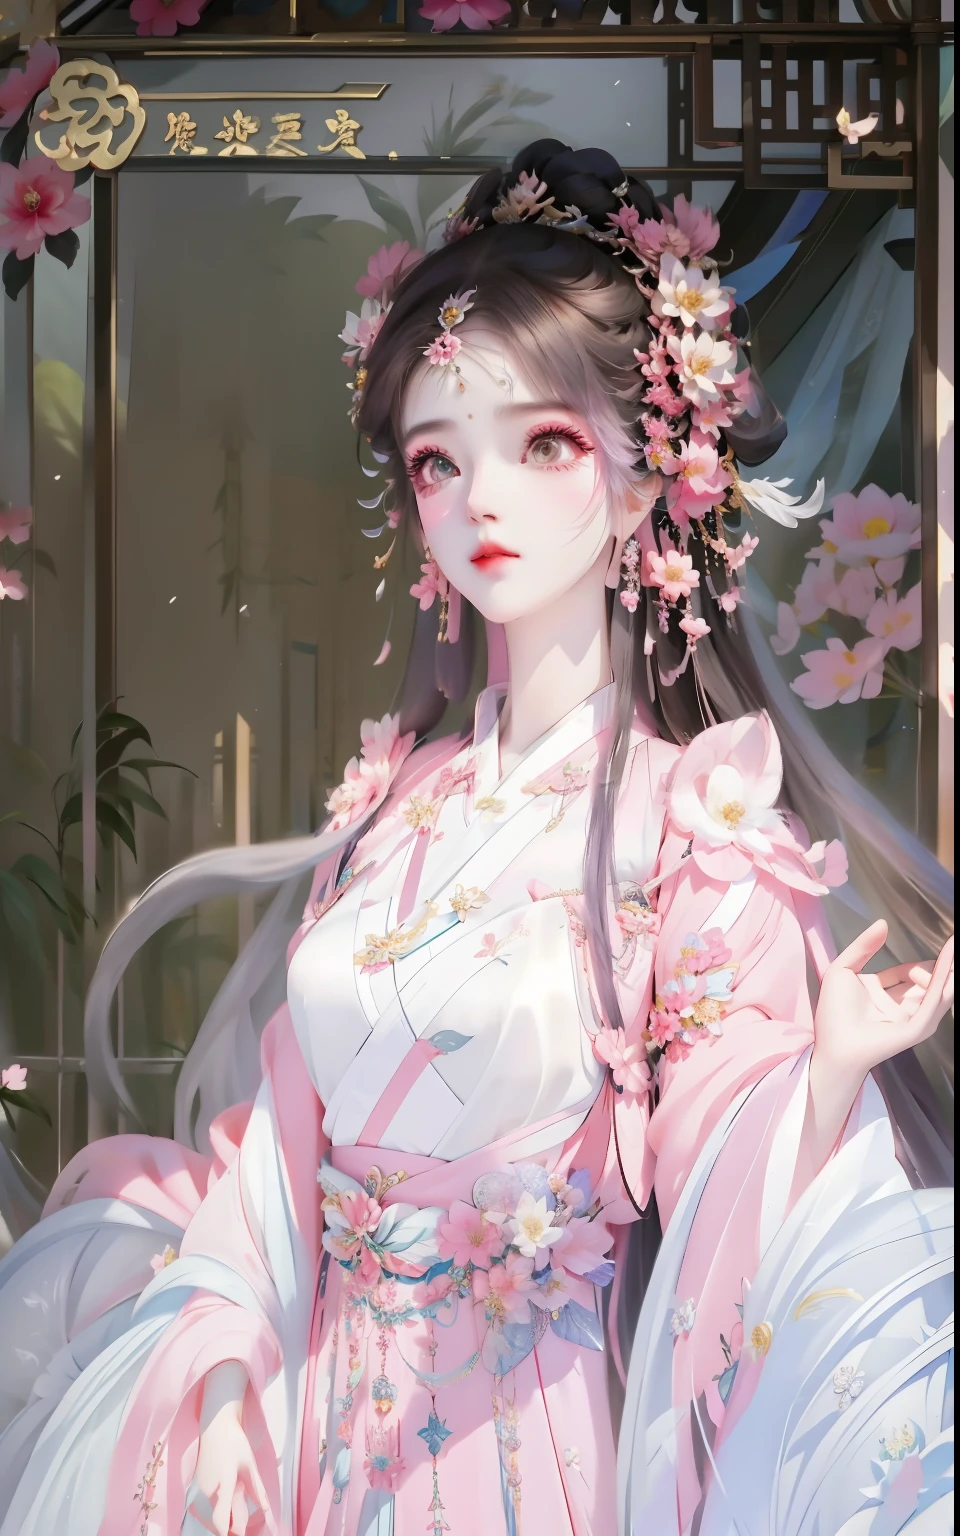 Wearing a pink dress、Anime girl with flowers in her hair, beautiful fantasy queen, ((beautiful fantasy queen)), palace ， A girl wearing Hanfu, full body xianxia, Inspired by Qiu Ying, Inspired by Ma Yuanyu, Inspired by Tang Yifen, xianxia fantasy, Inspired by Huayan, Inspired by Huang Ji